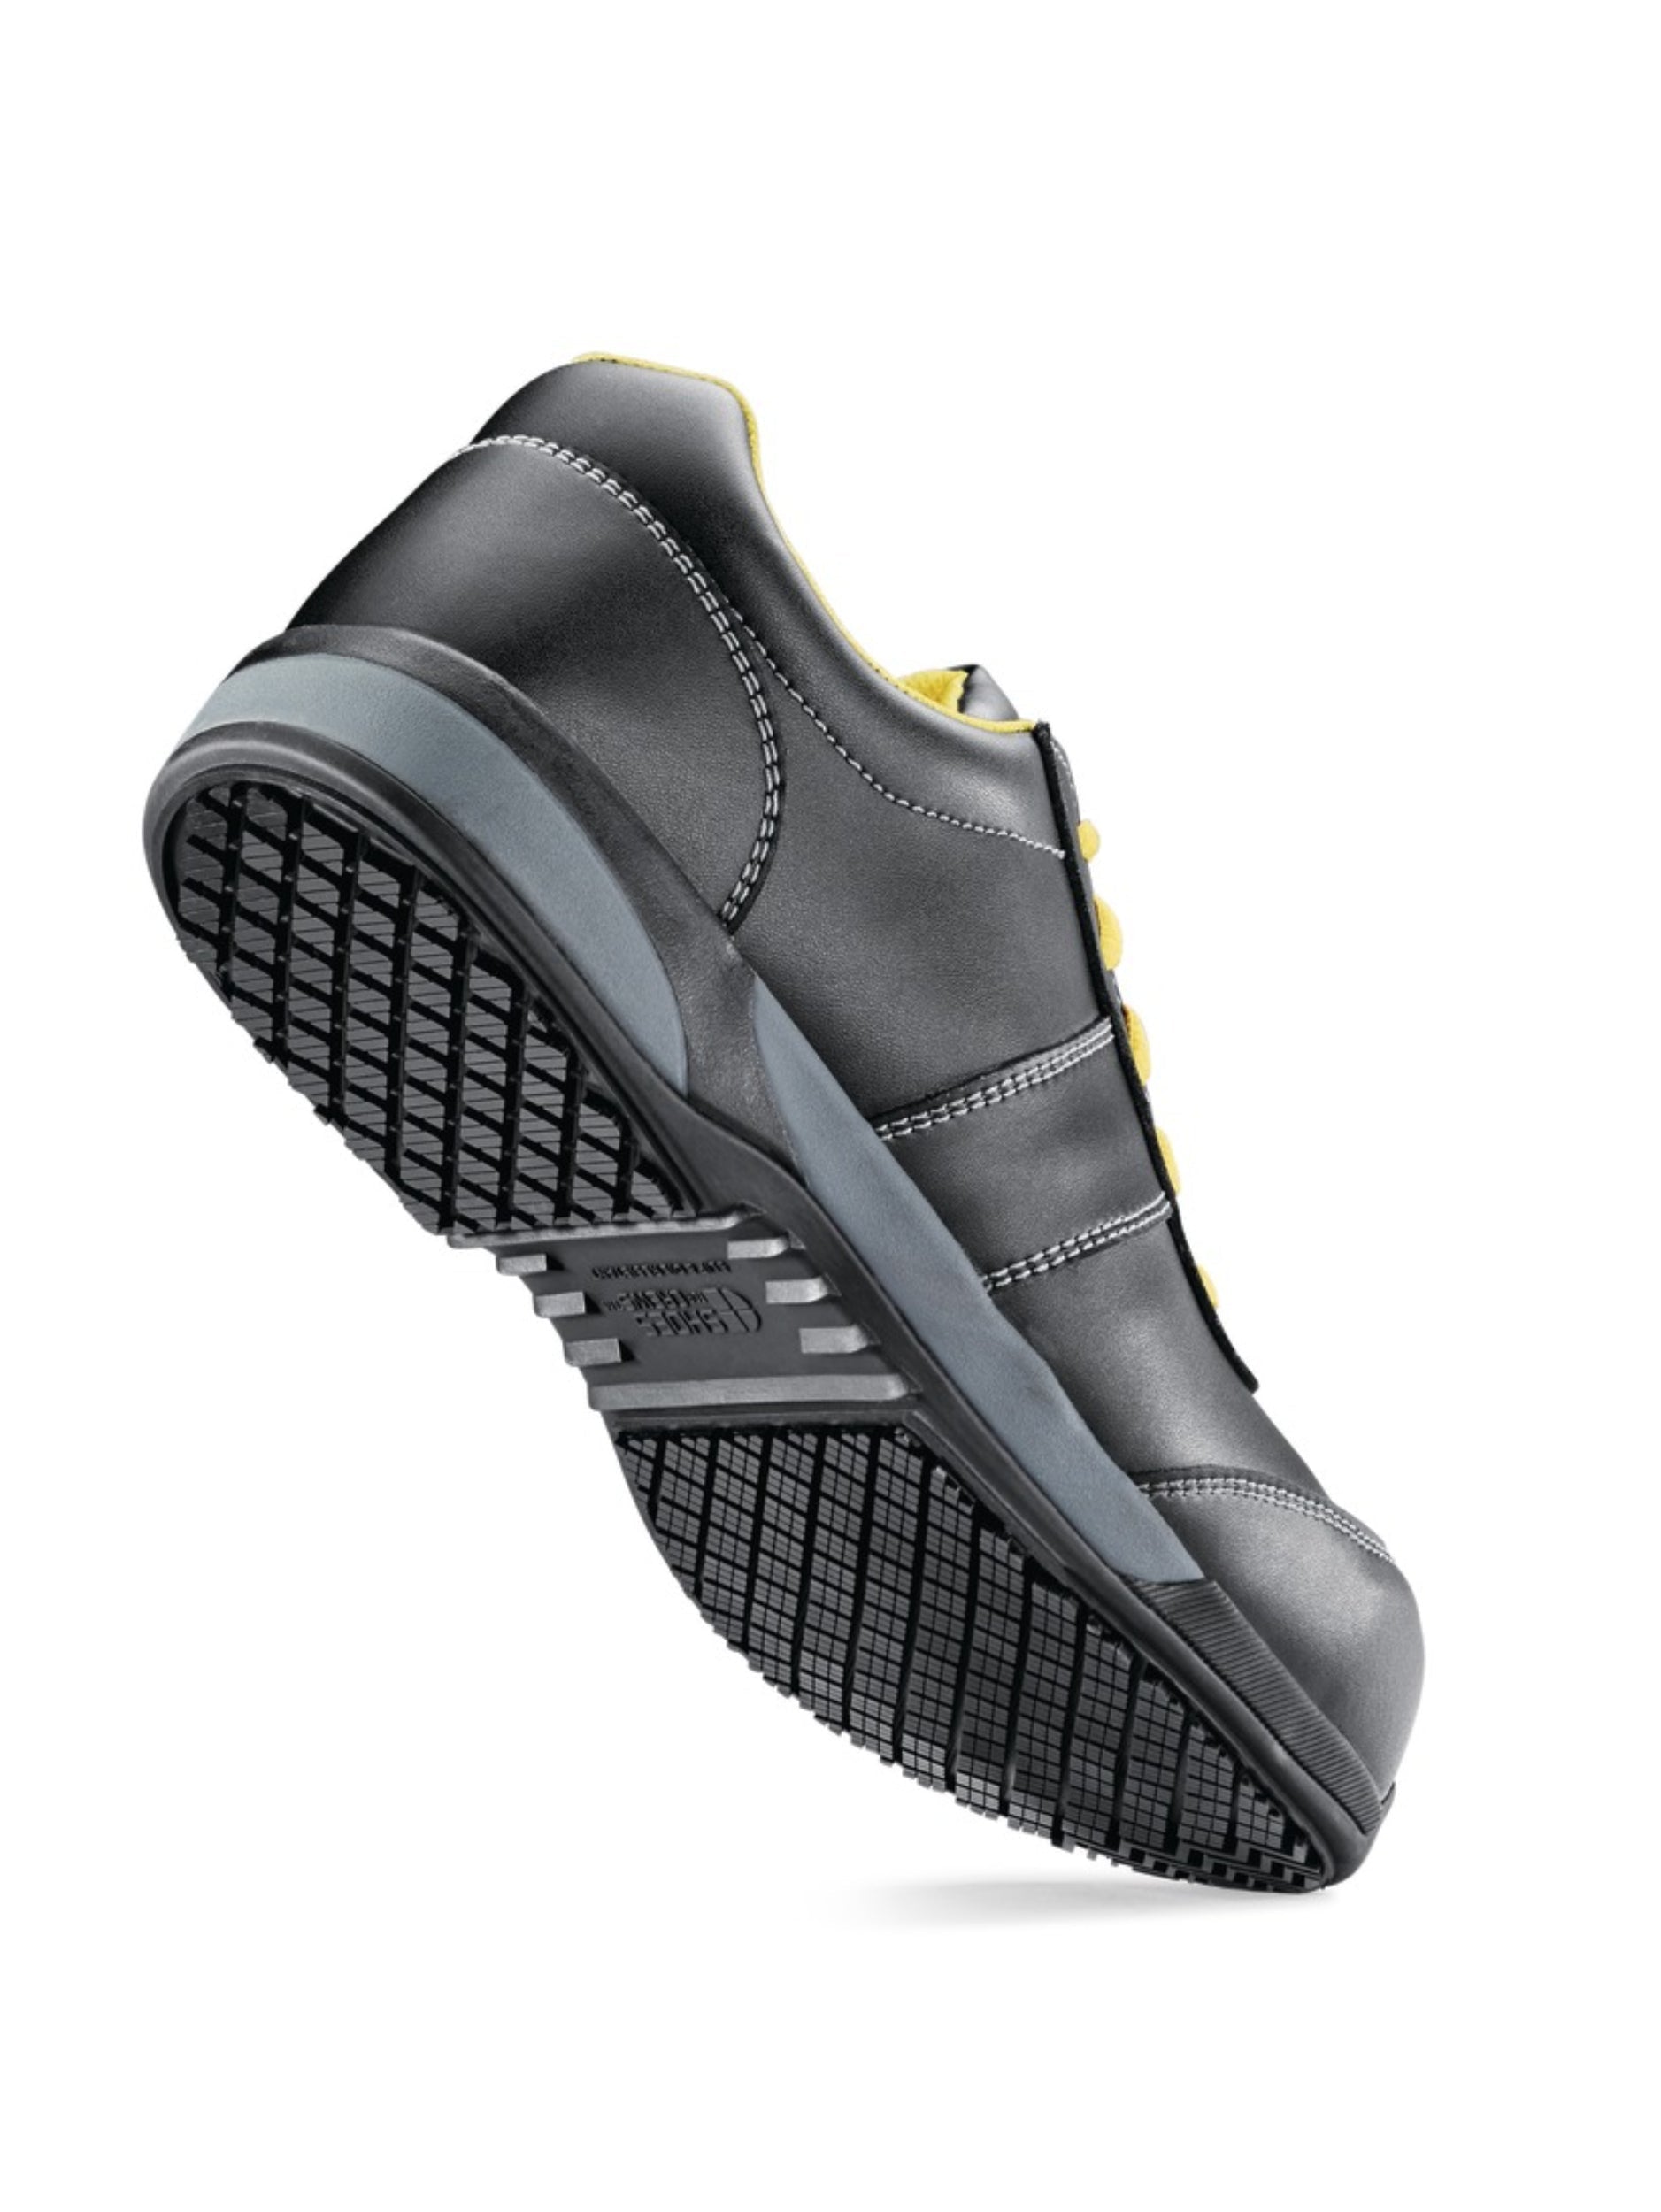 Men's Safety Shoe Clyde (S3) by  Shoes For Crews.